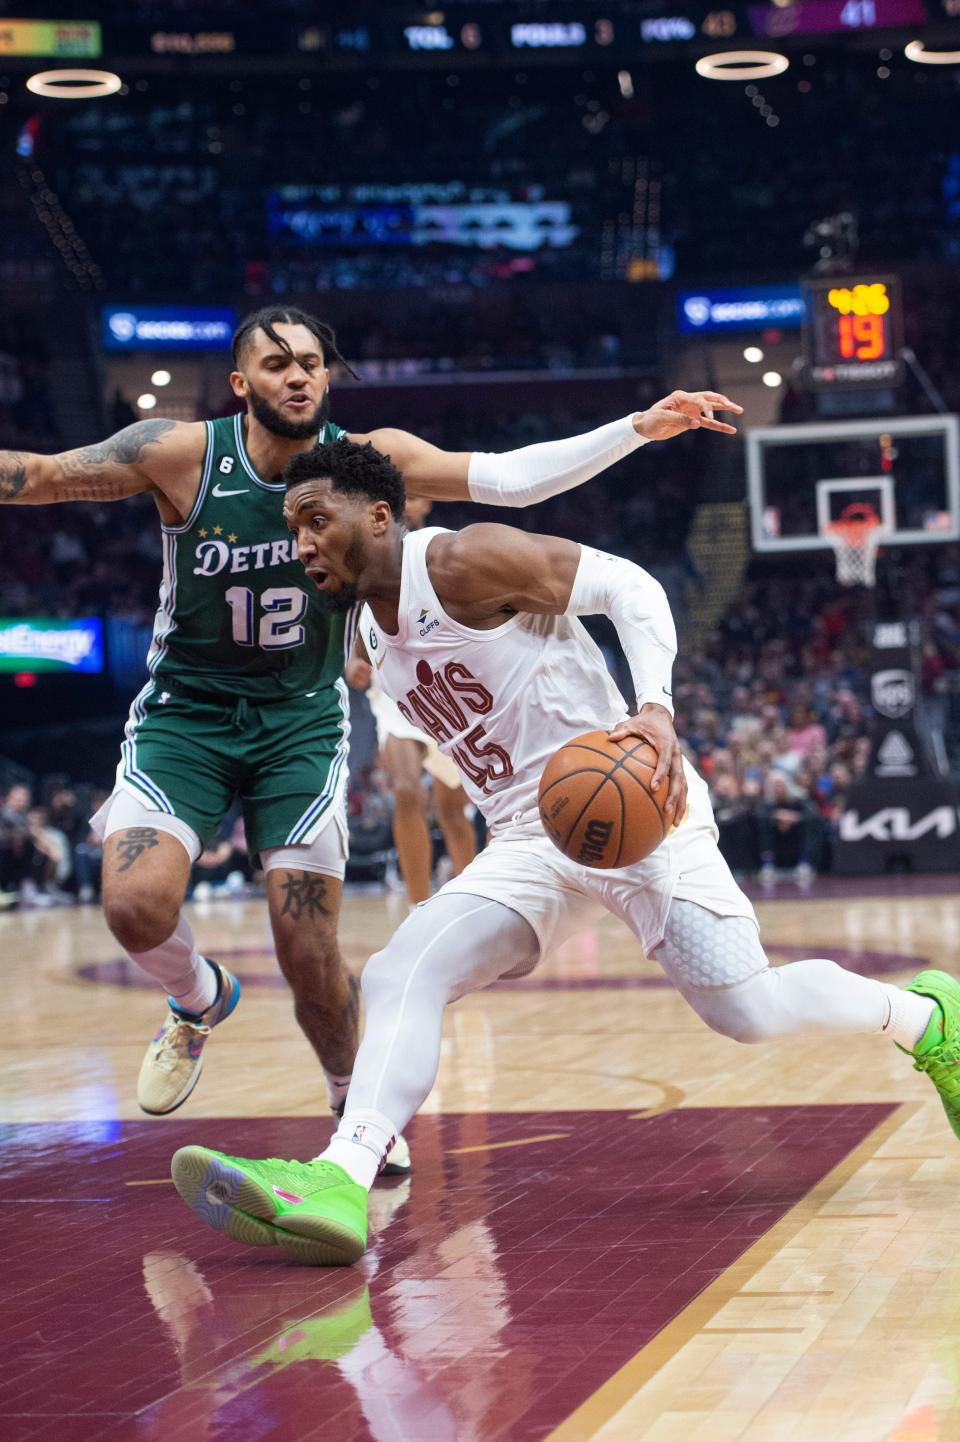 Cleveland Cavaliers' Donovan Mitchell (45) drives past Detroit Pistons' Isaiah Livers during the first half of an NBA basketball game in Cleveland, Saturday, March 4, 2023. (AP Photo/Phil Long)